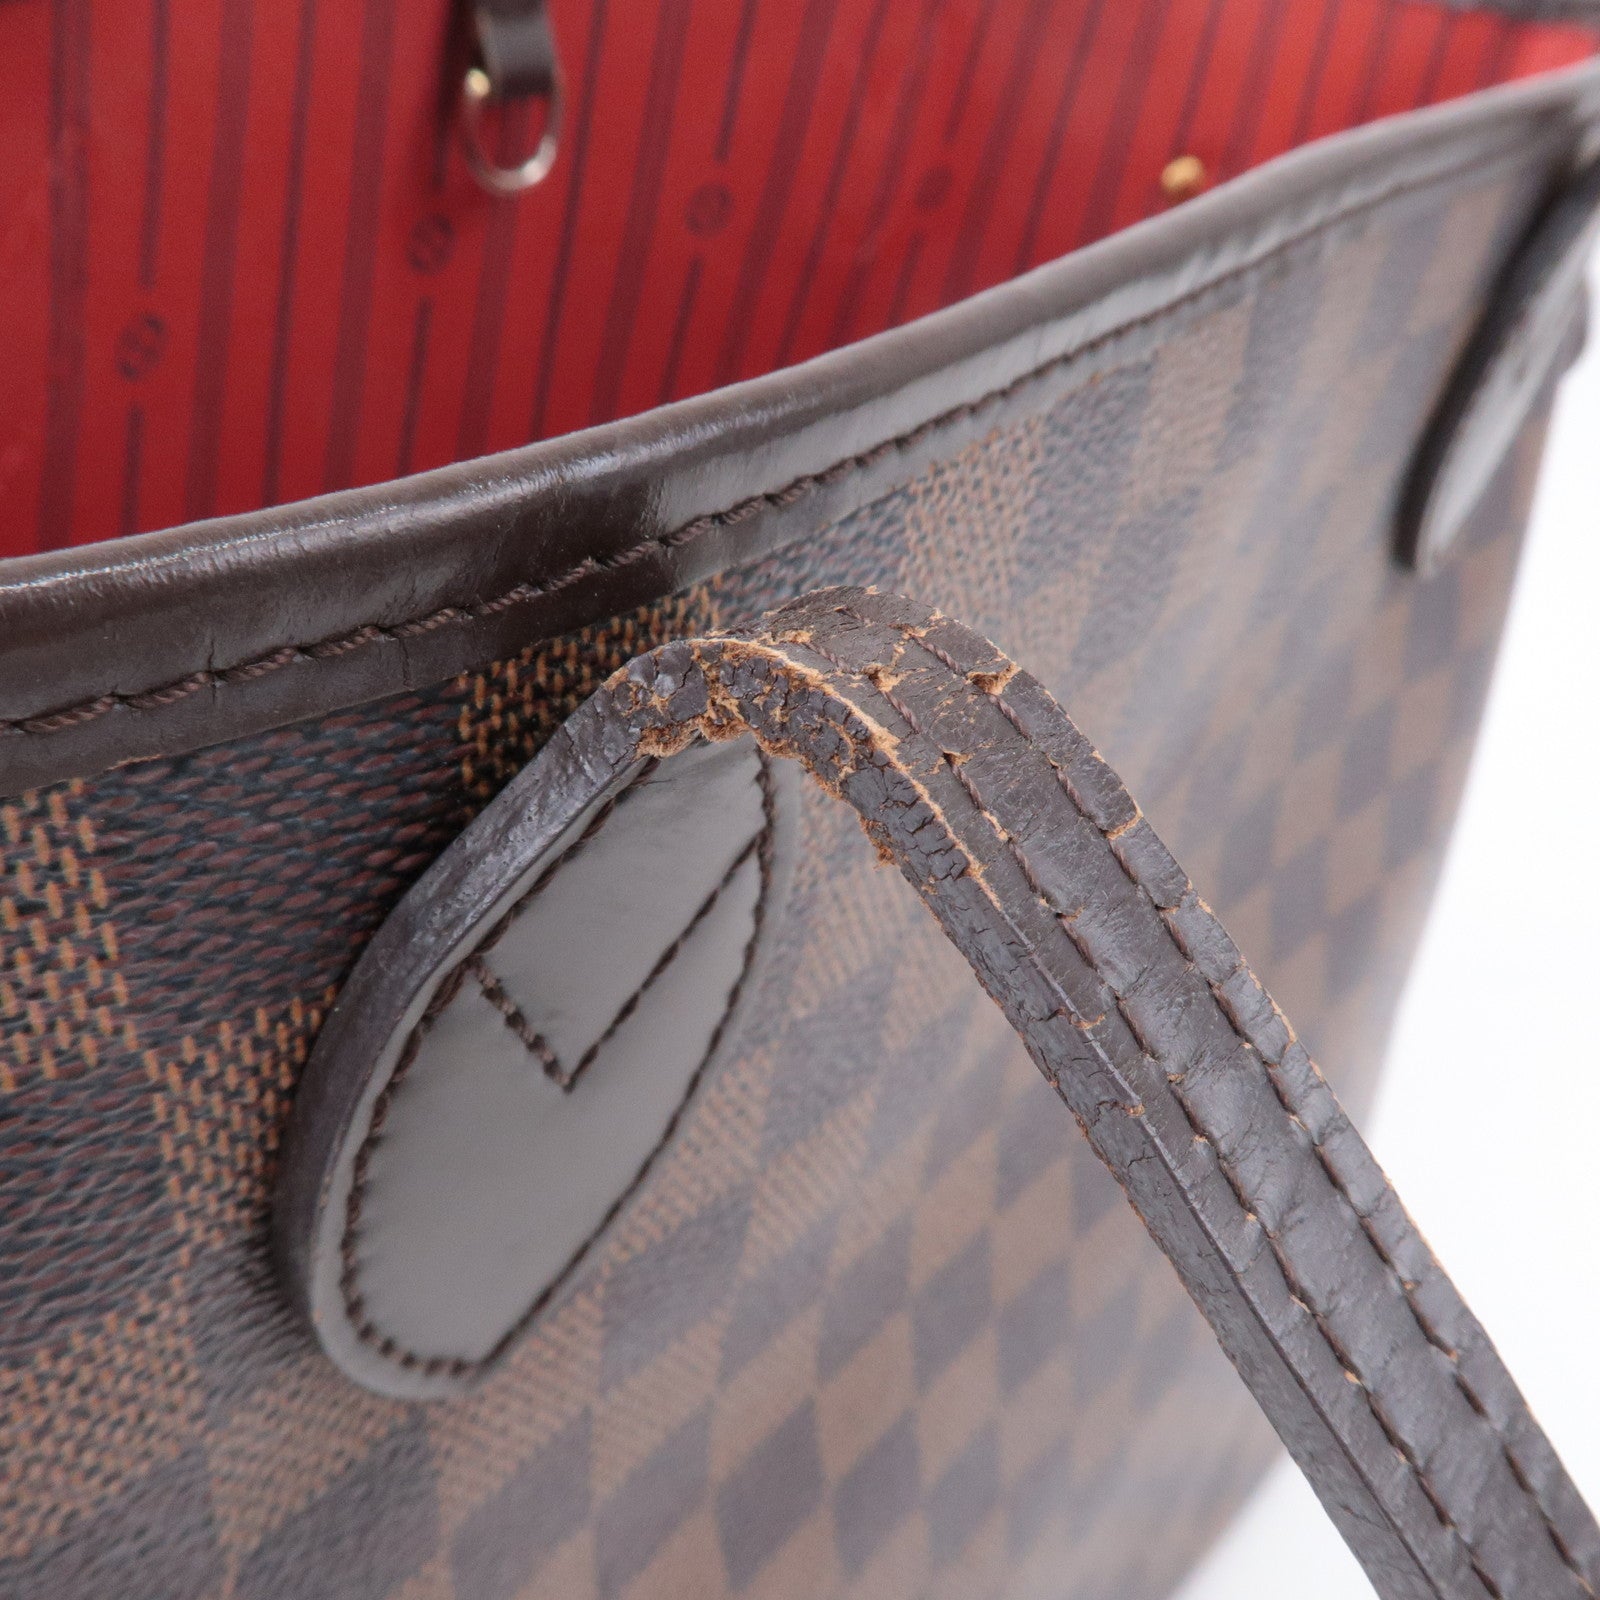 Louis-Vuitton-Damier-Ebene-Neverfull-MM-Tote-Bag-Brown-N51105 –  dct-ep_vintage luxury Store